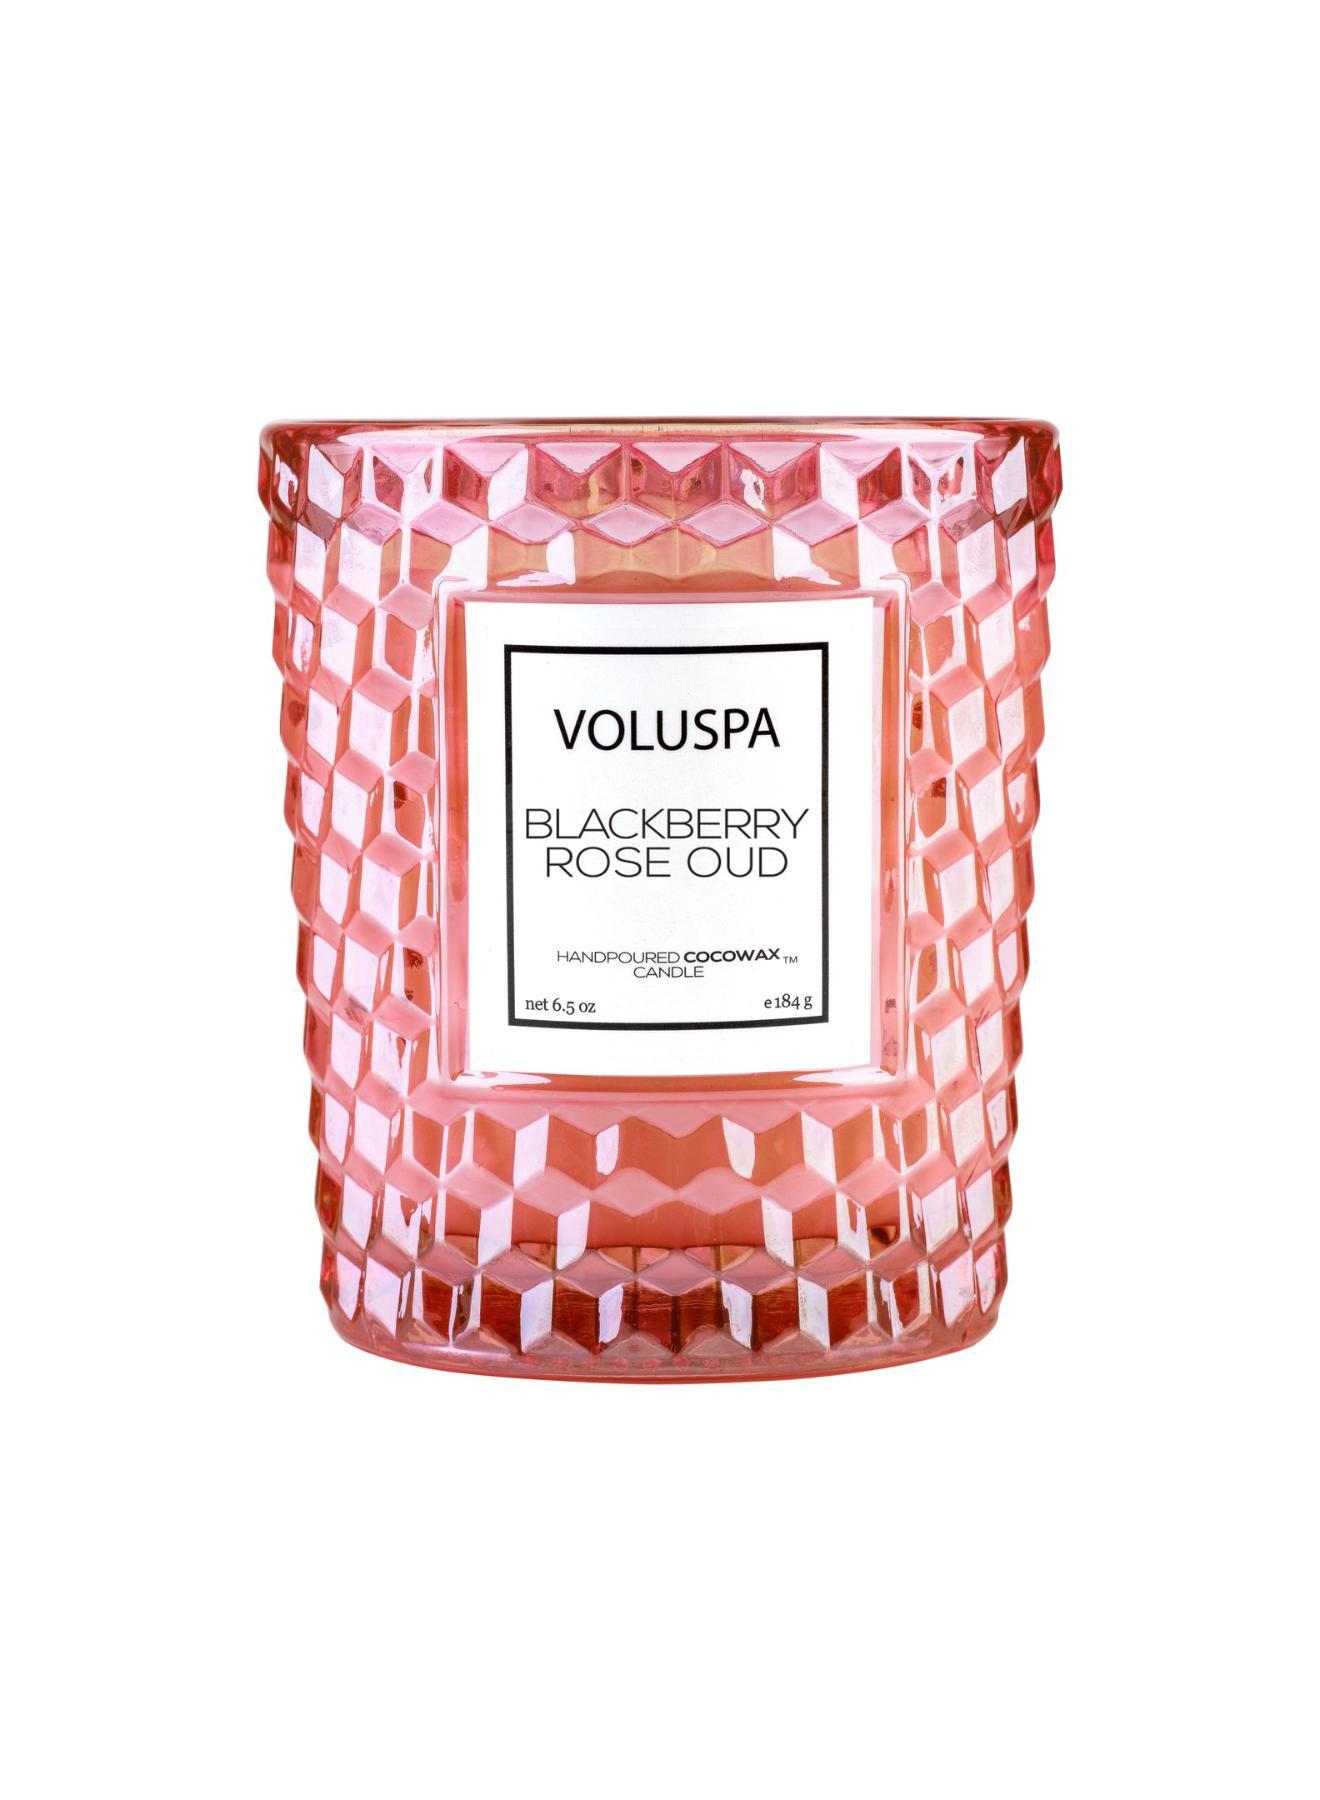 Blackberry rose oud classic candle - 1